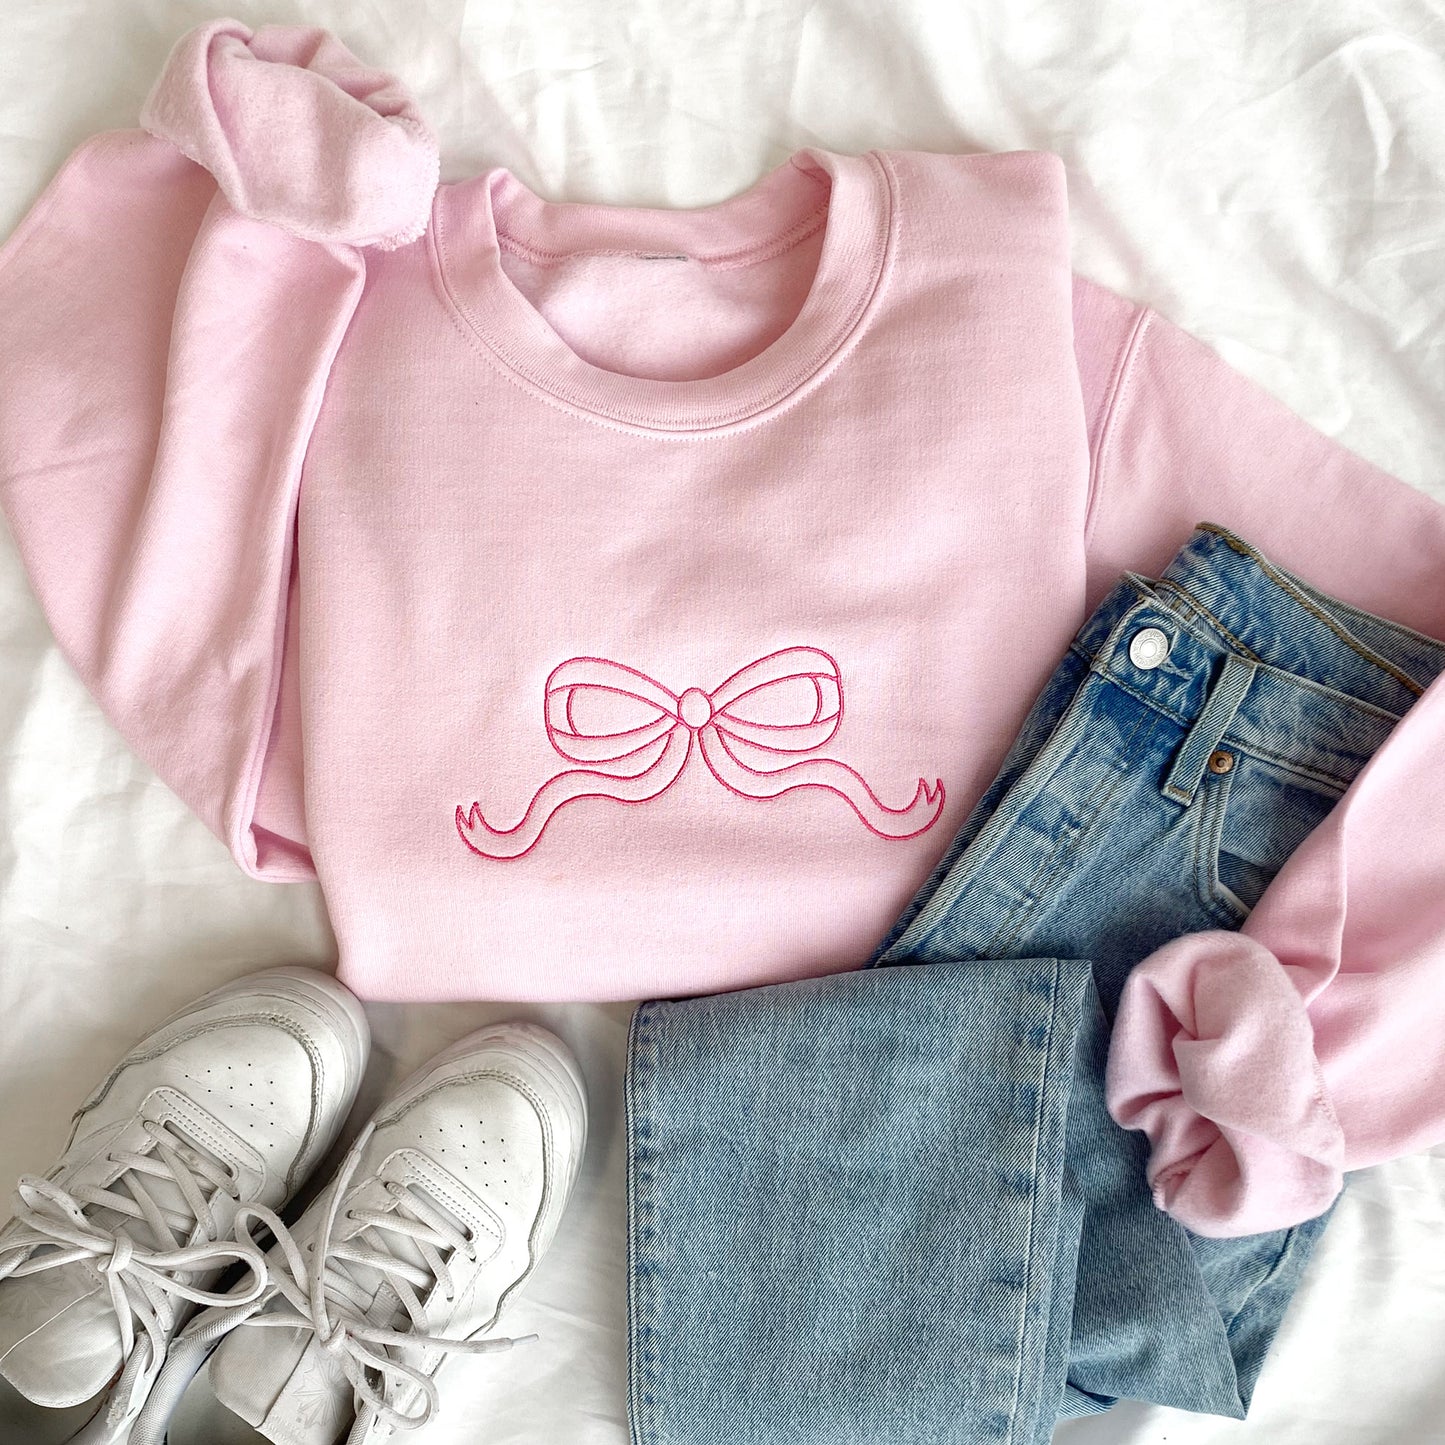 styled flat lay of a light pink crewneck sweatshirt with pink outline embroidered bow. Styled with jeans and white sneakers